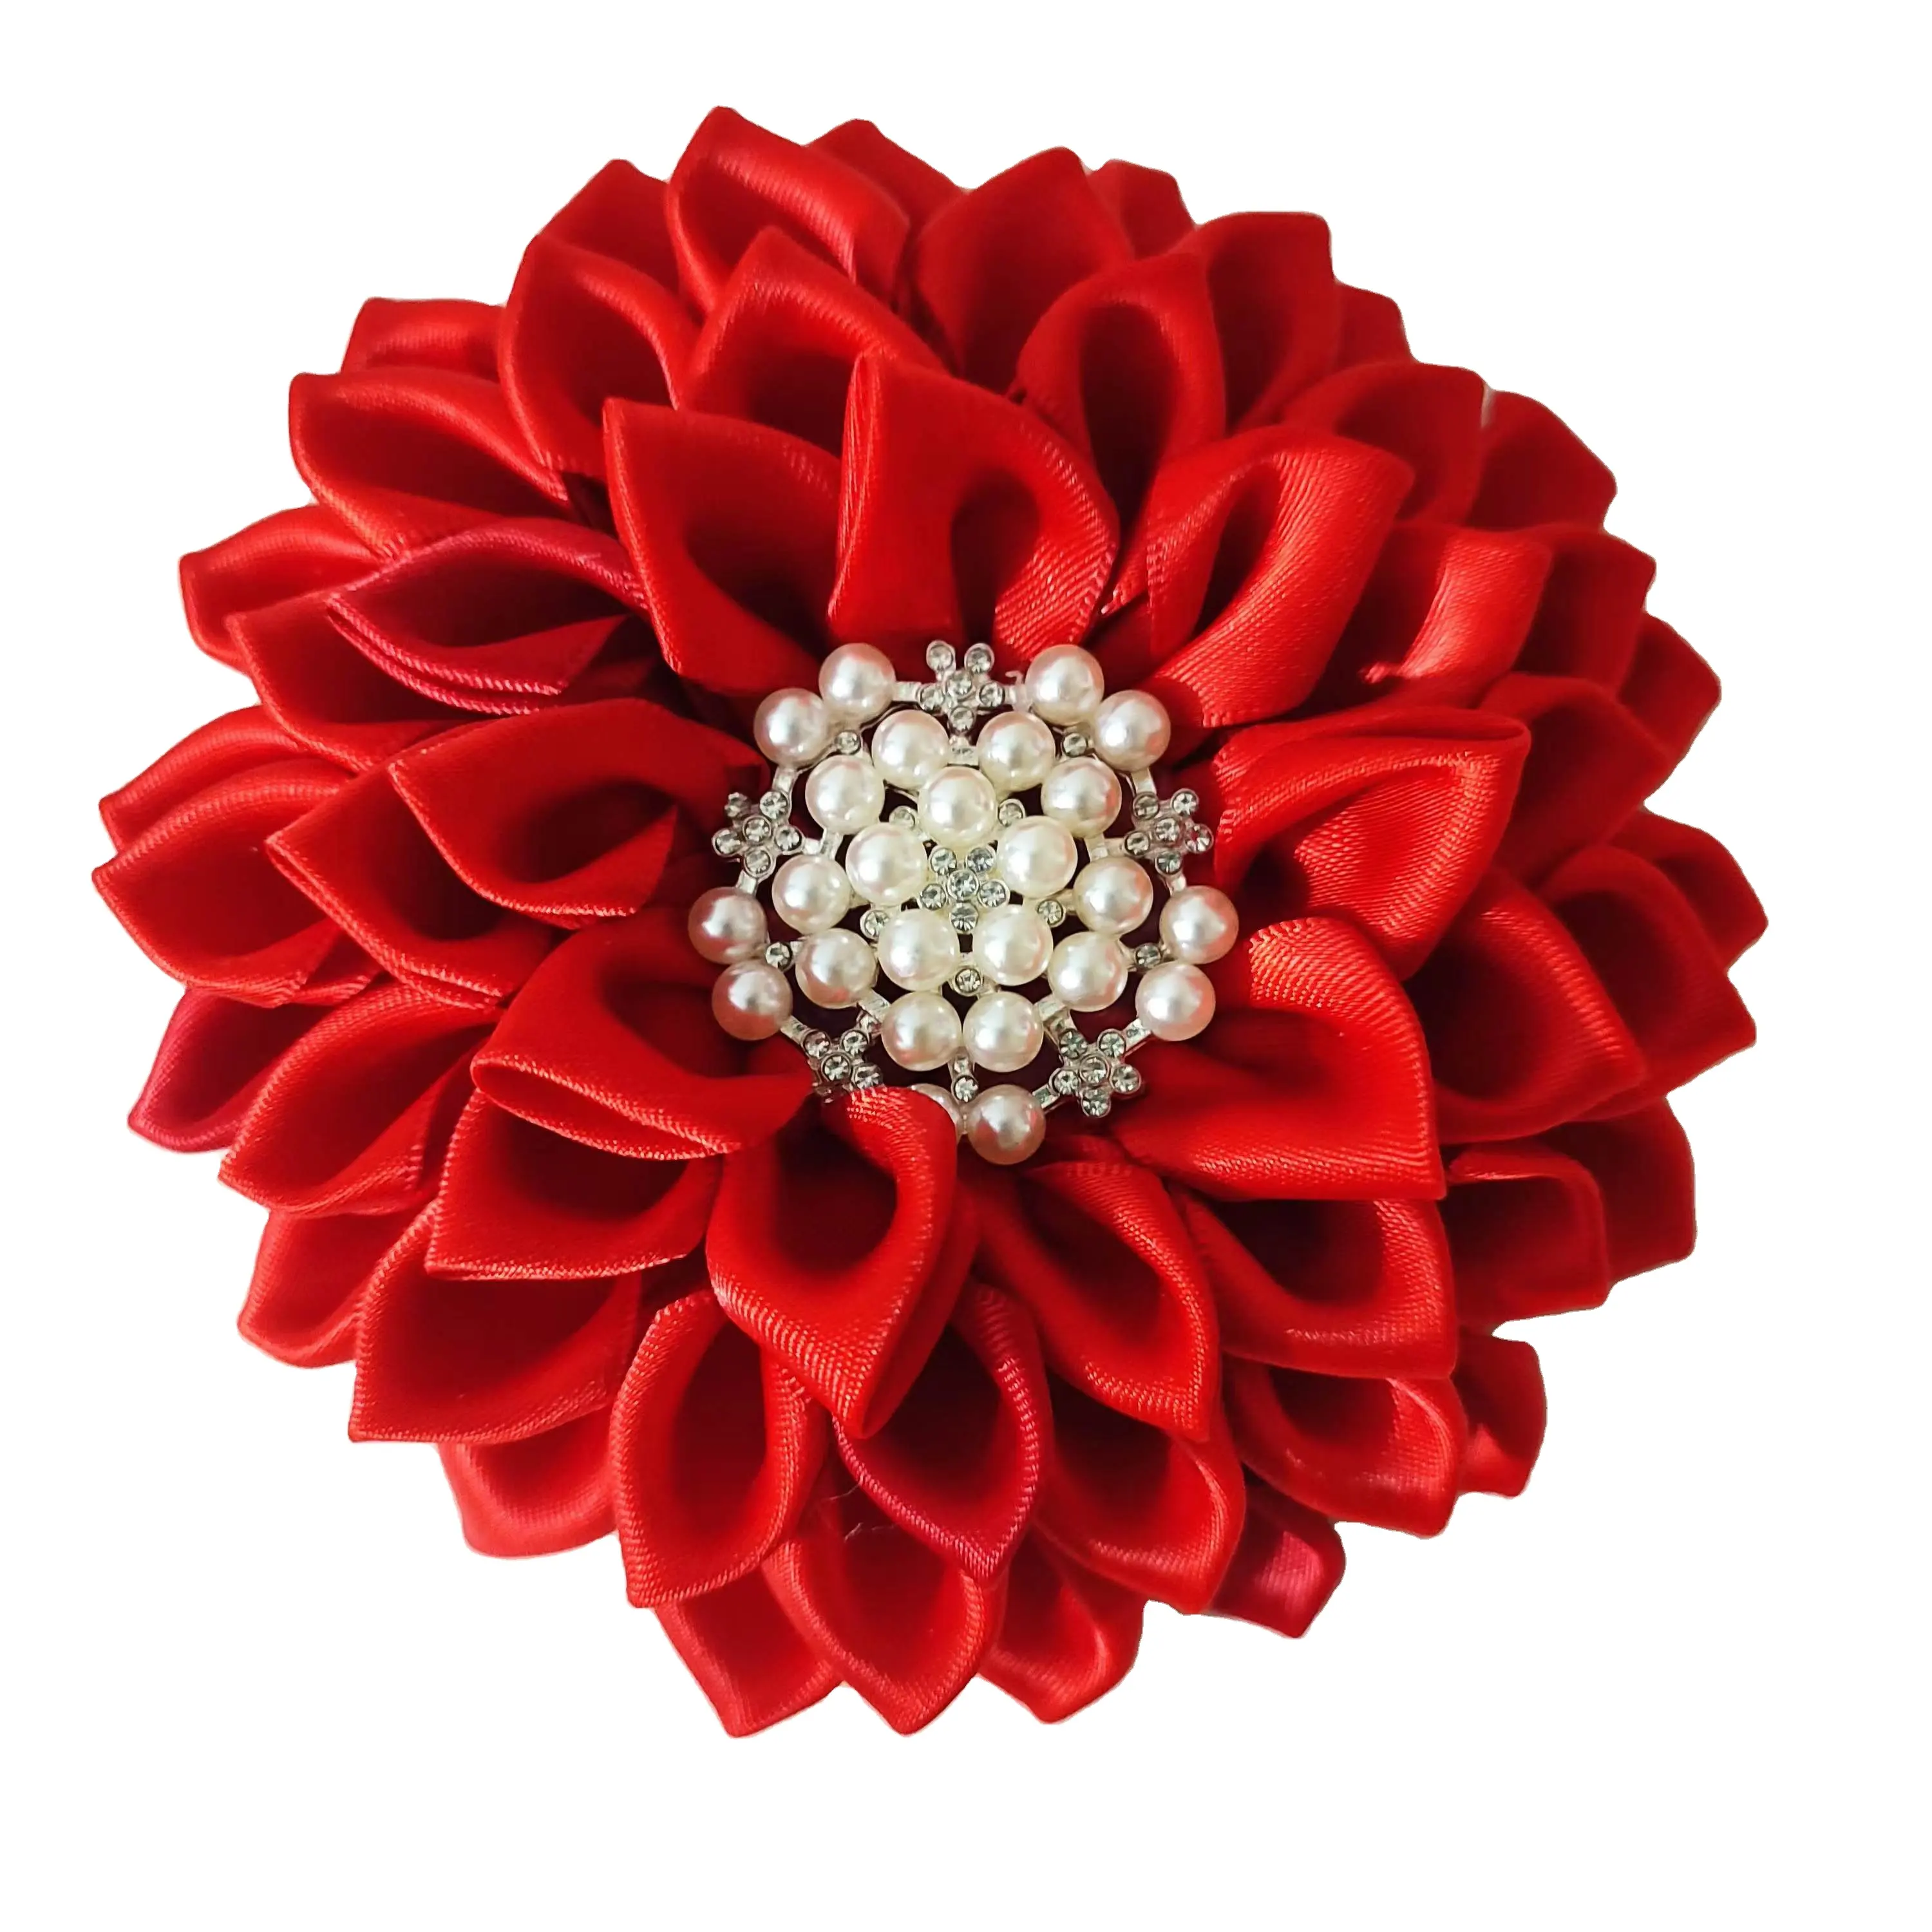 All red sorority Brooch flower best price 4.5X4.5 inches handmade Flower for women brooch pin